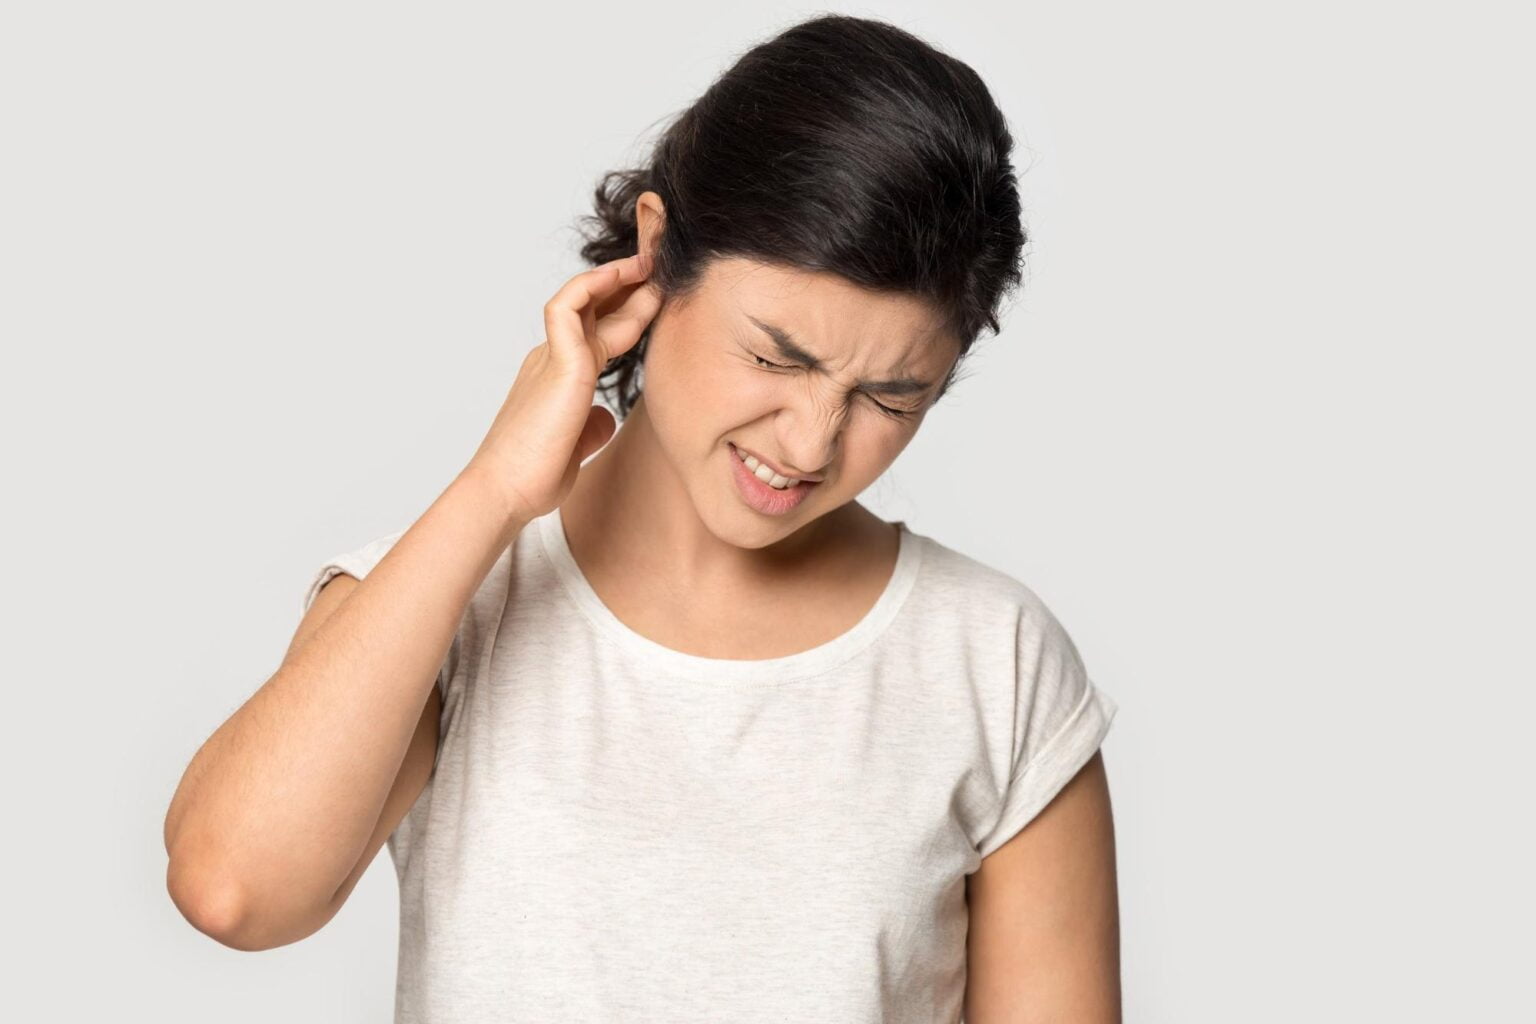 How to prevent ear infections